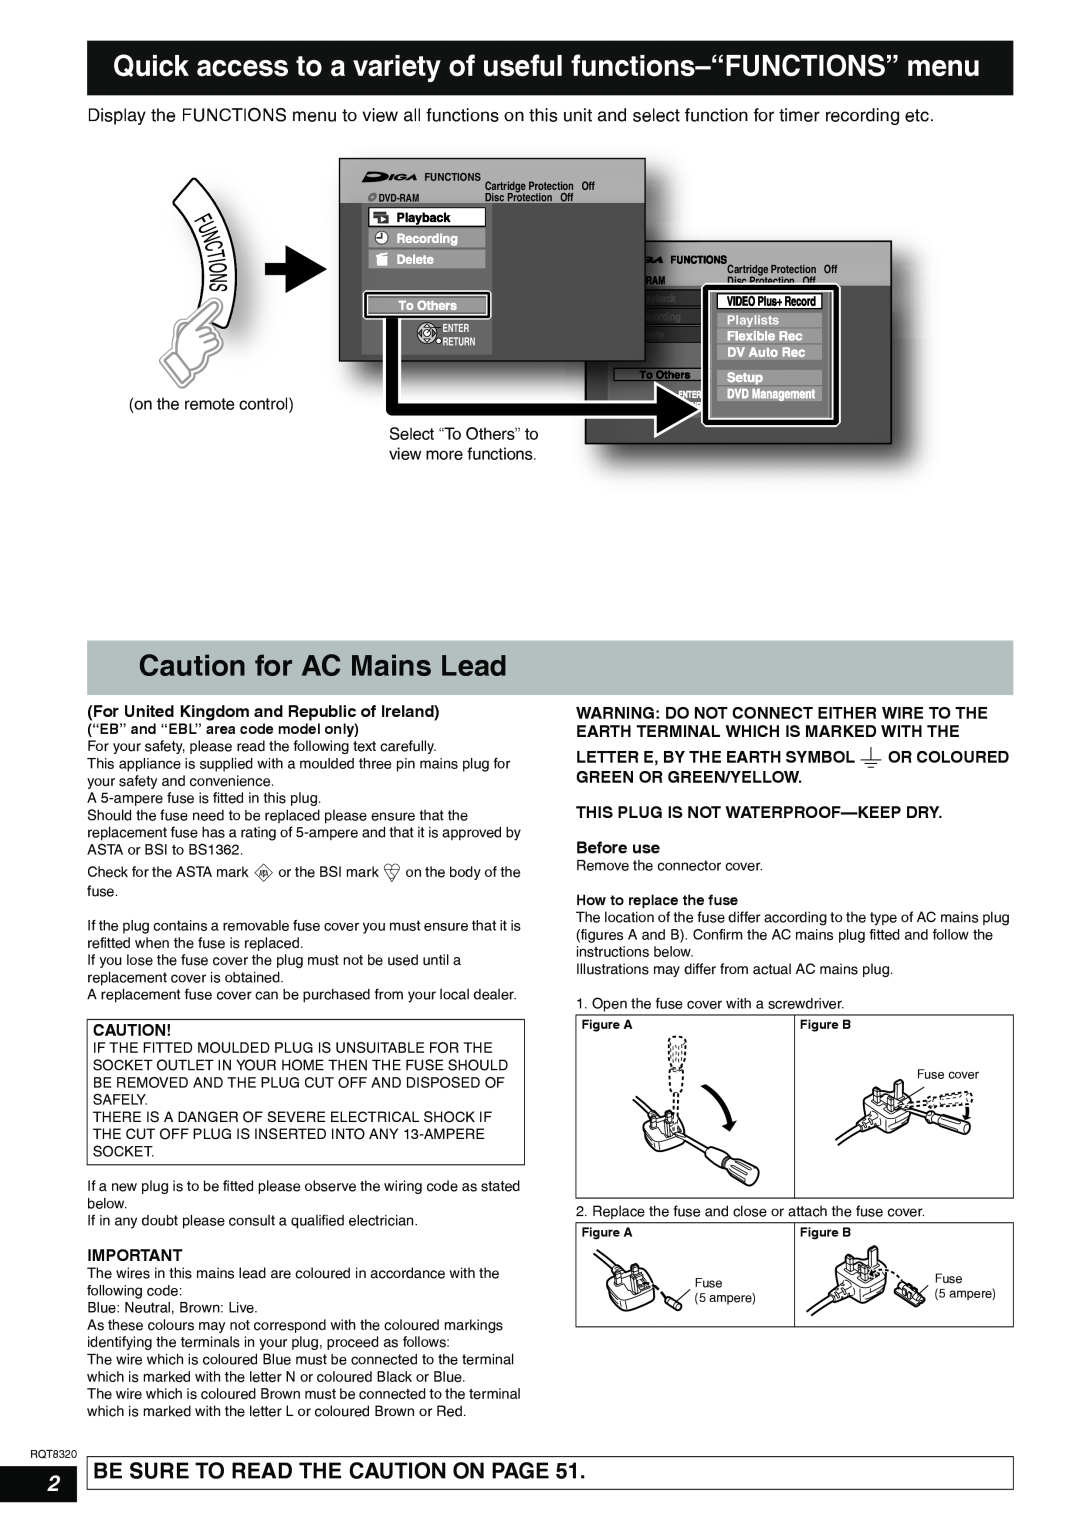 Panasonic DMR-ES15EB manual Caution for AC Mains Lead, Be Sure To Read The Caution On Page 